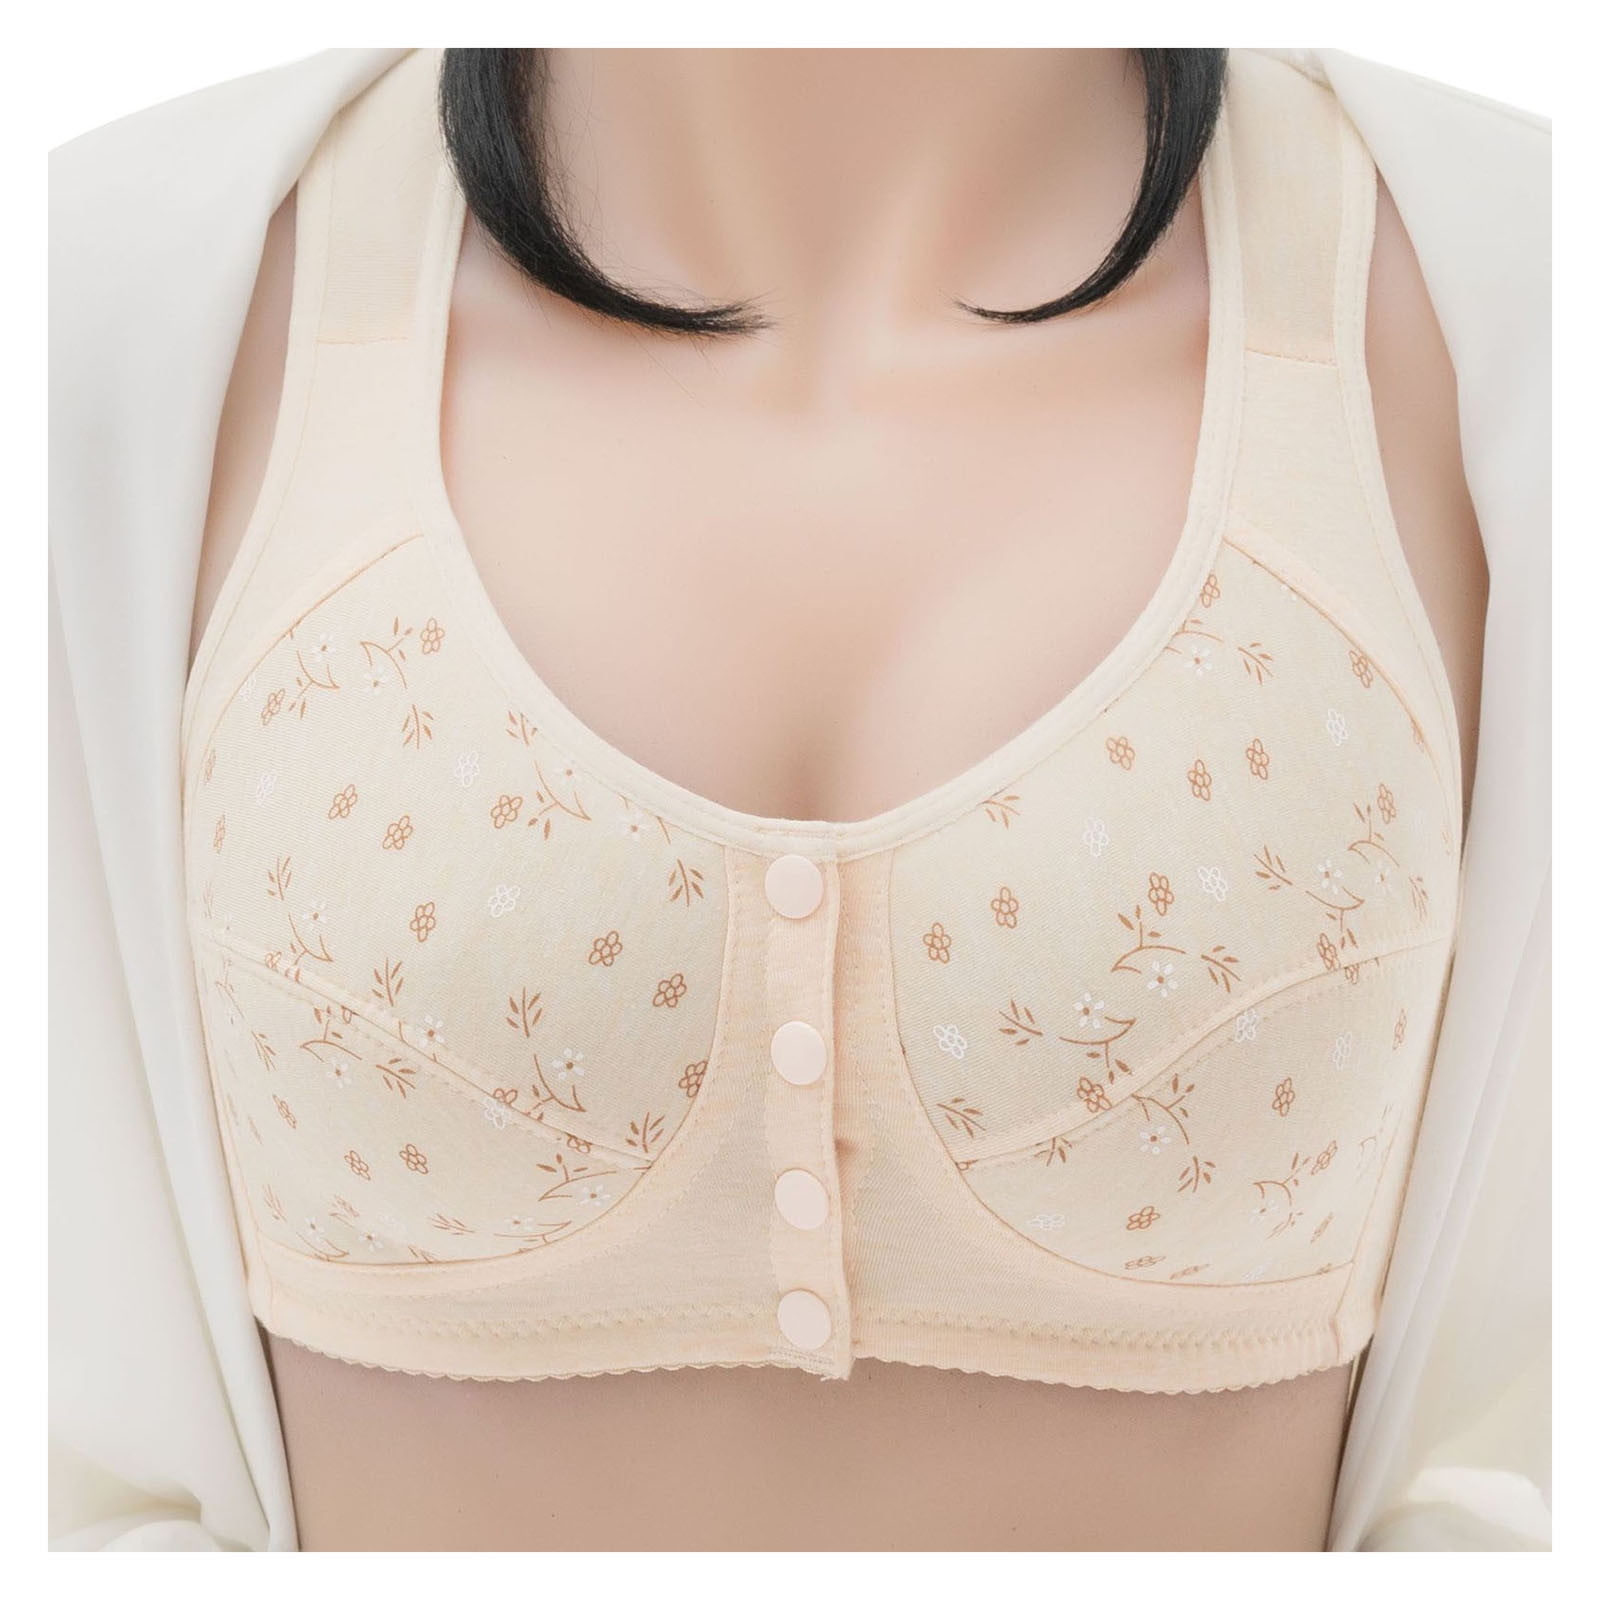 Aayomet Push Up Bra Women's Plus-Size Cate Underwire Full Cup Banded Bra, Beige 90B 